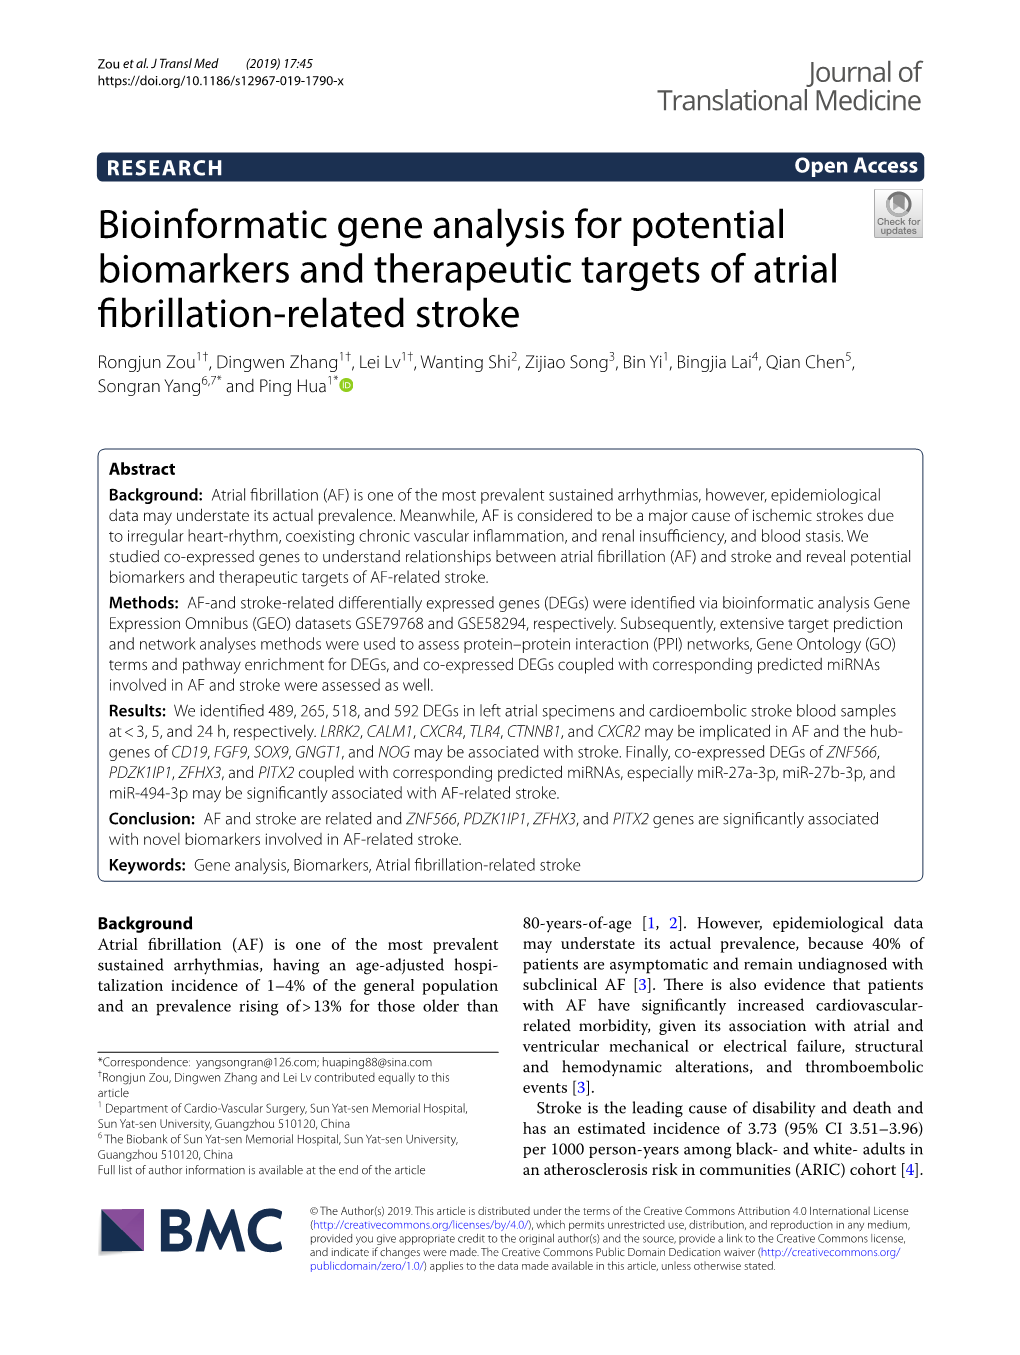 Bioinformatic Gene Analysis for Potential Biomarkers And